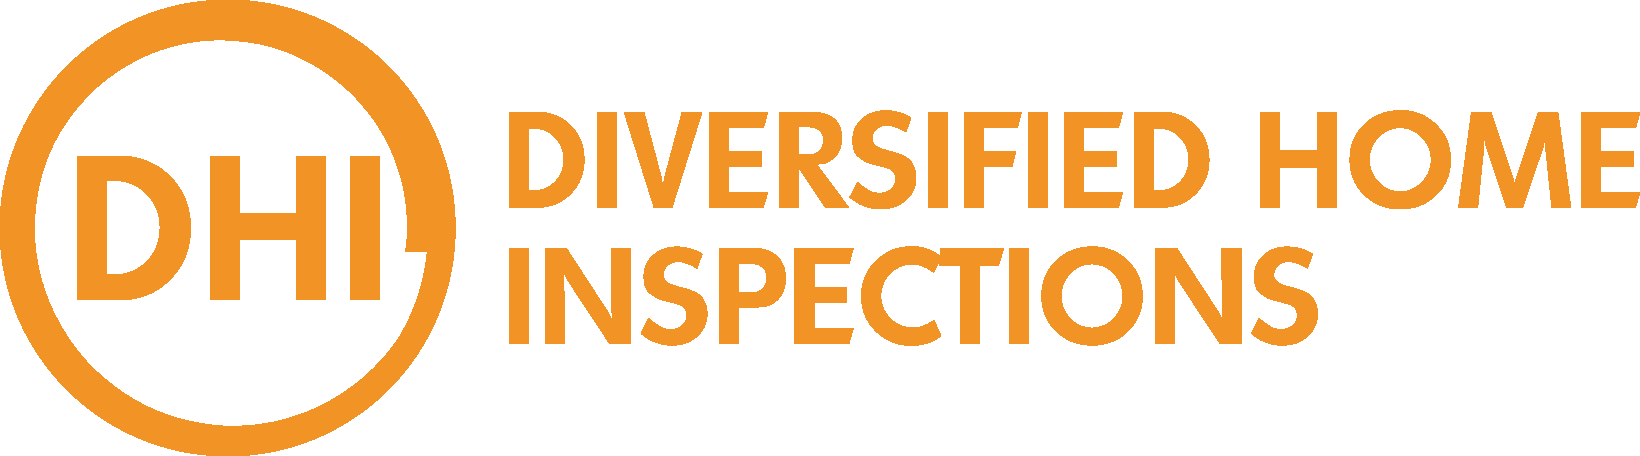 Diversified Home Inspection